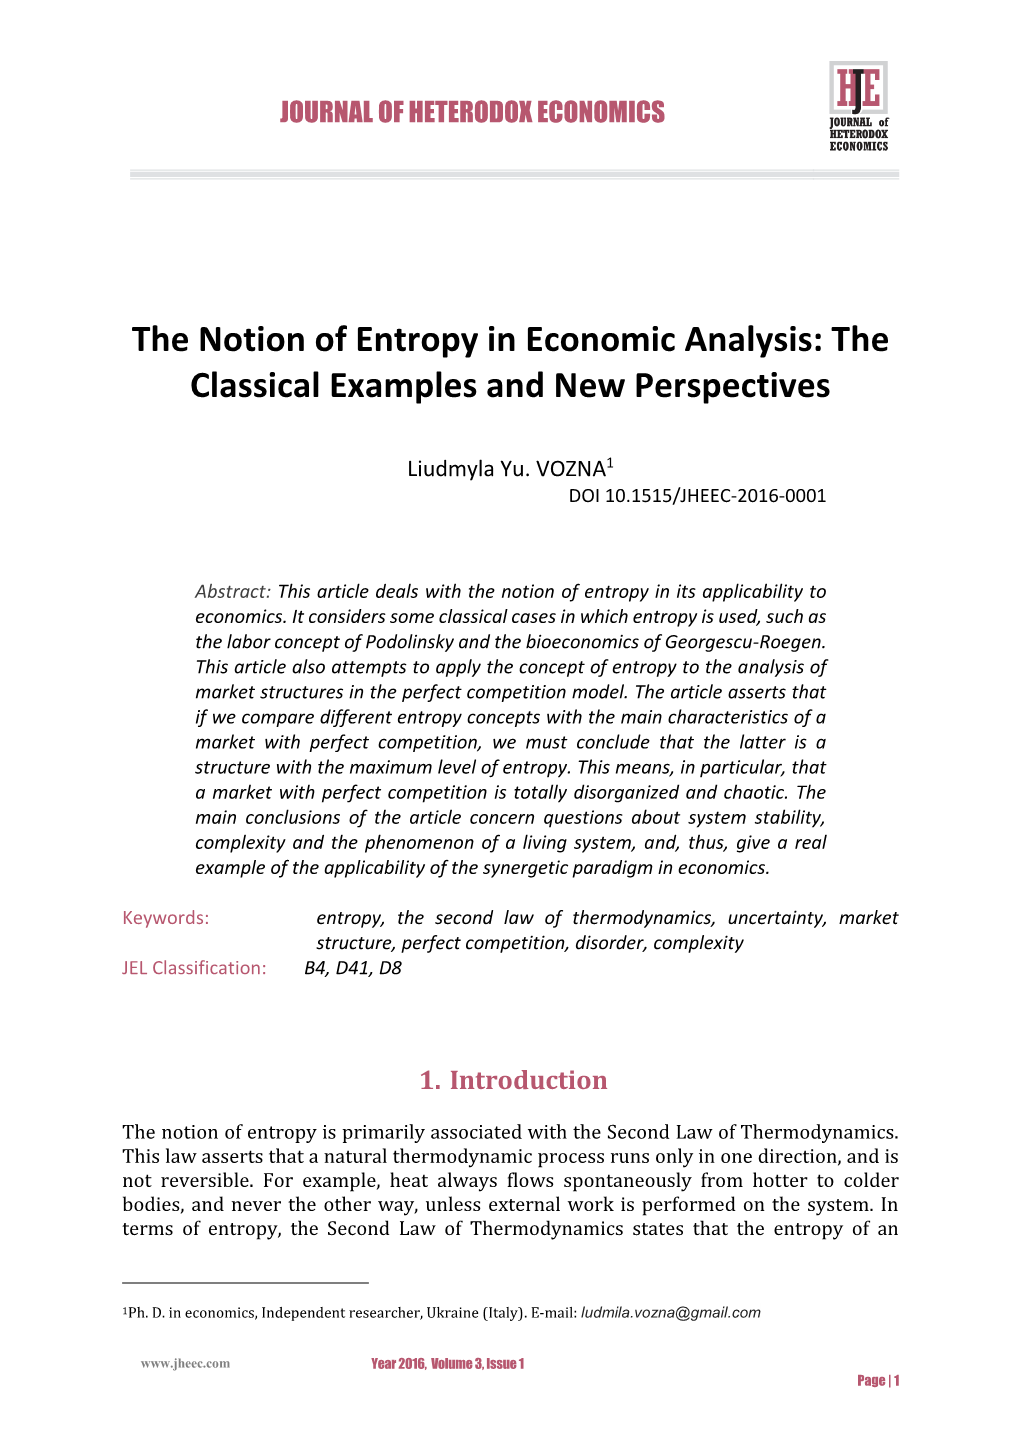 The Notion of Entropy in Economic Analysis: the Classical Examples and New Perspectives